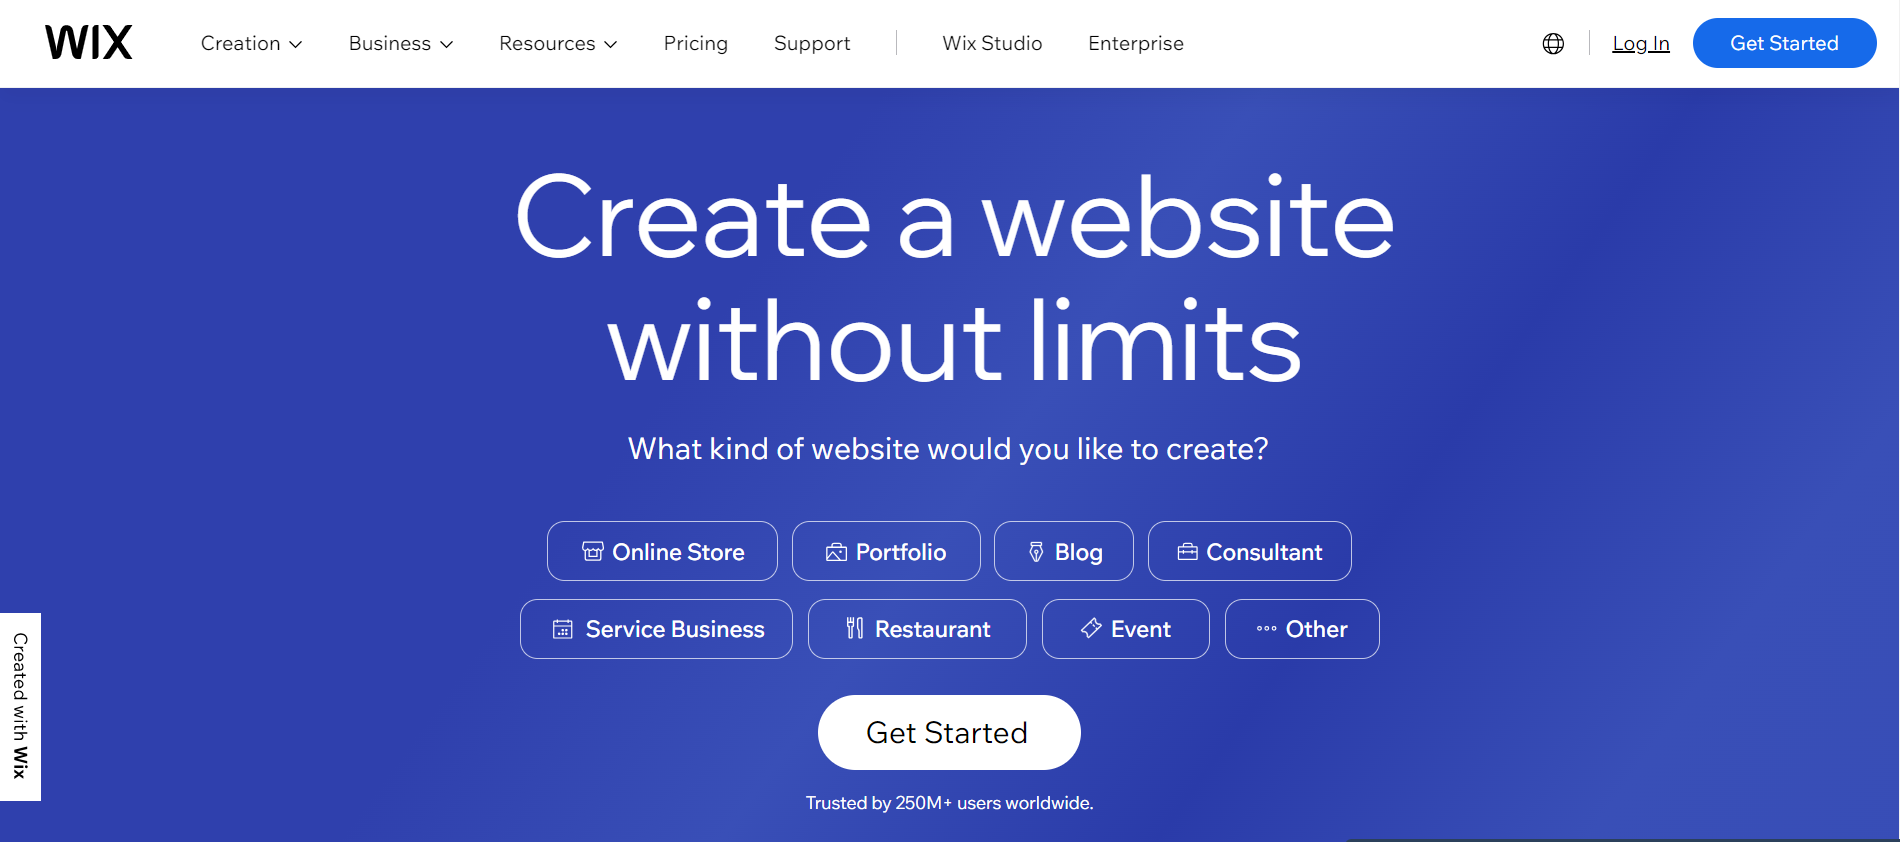 7 Reasons Not to Use Wix for Small Business Websites